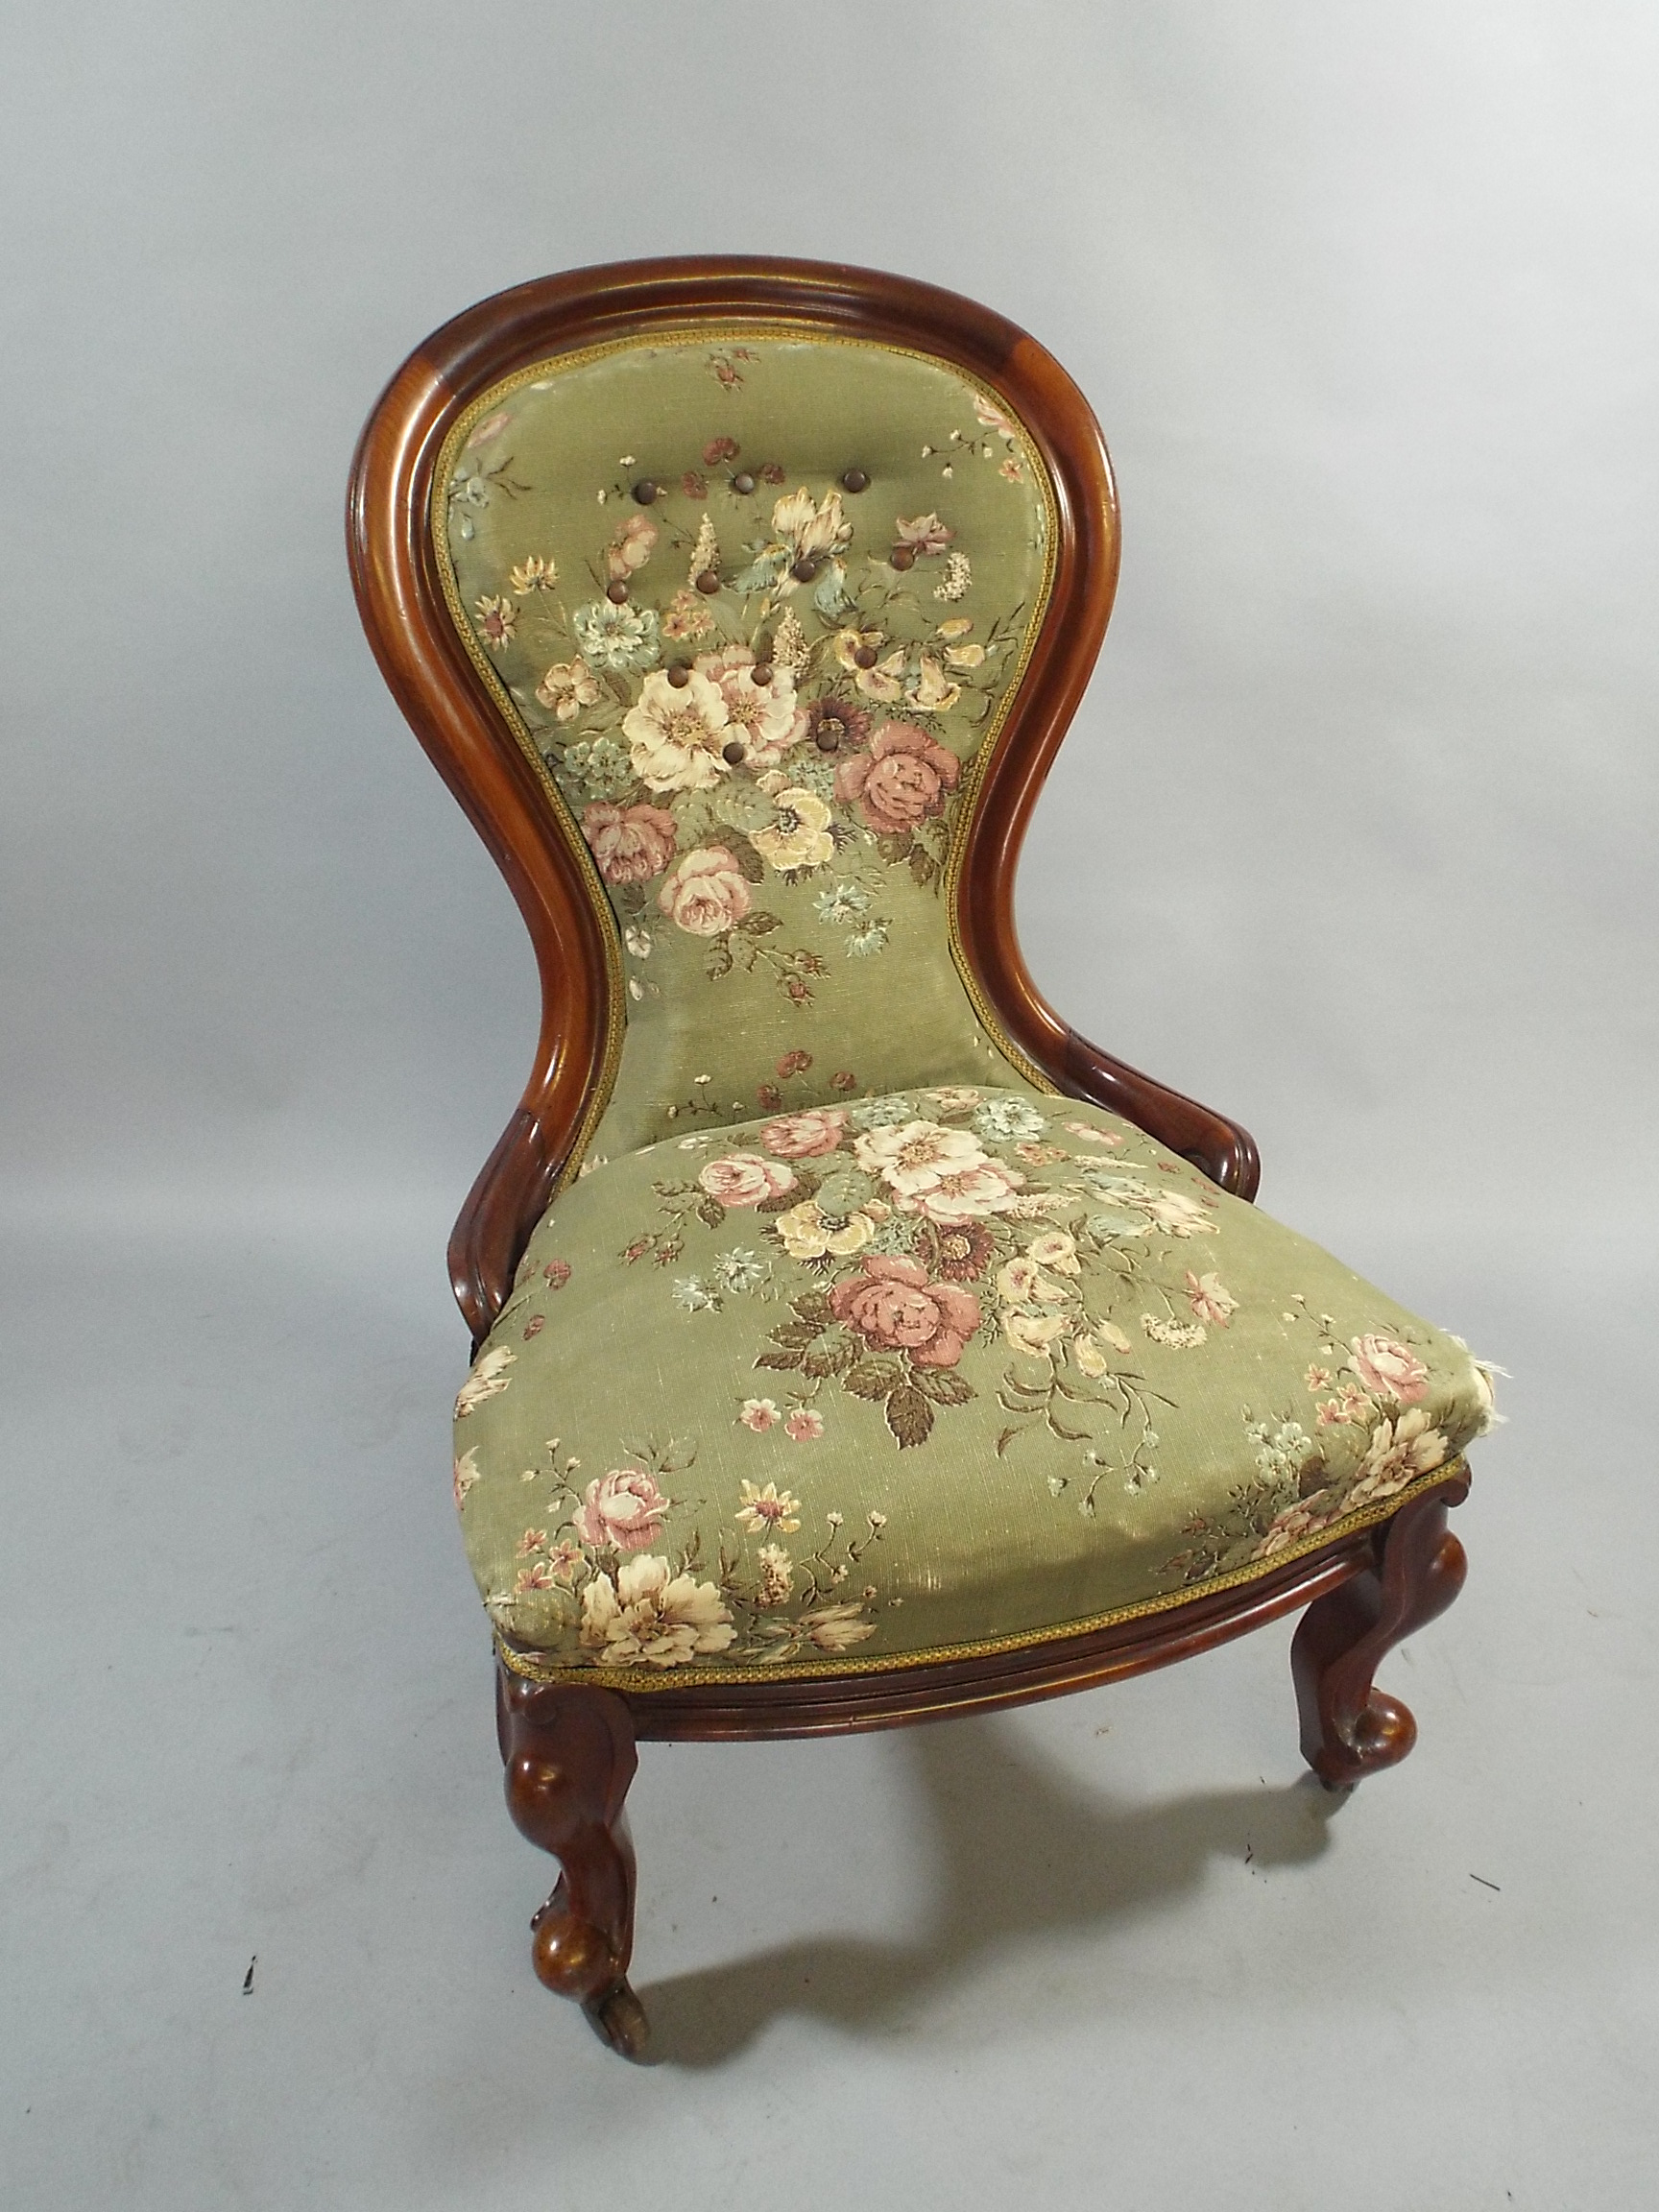 A Victorian Mahogany Framed Spoon Back Ladies Nursing Chair with Carved Cabriole Front Legs